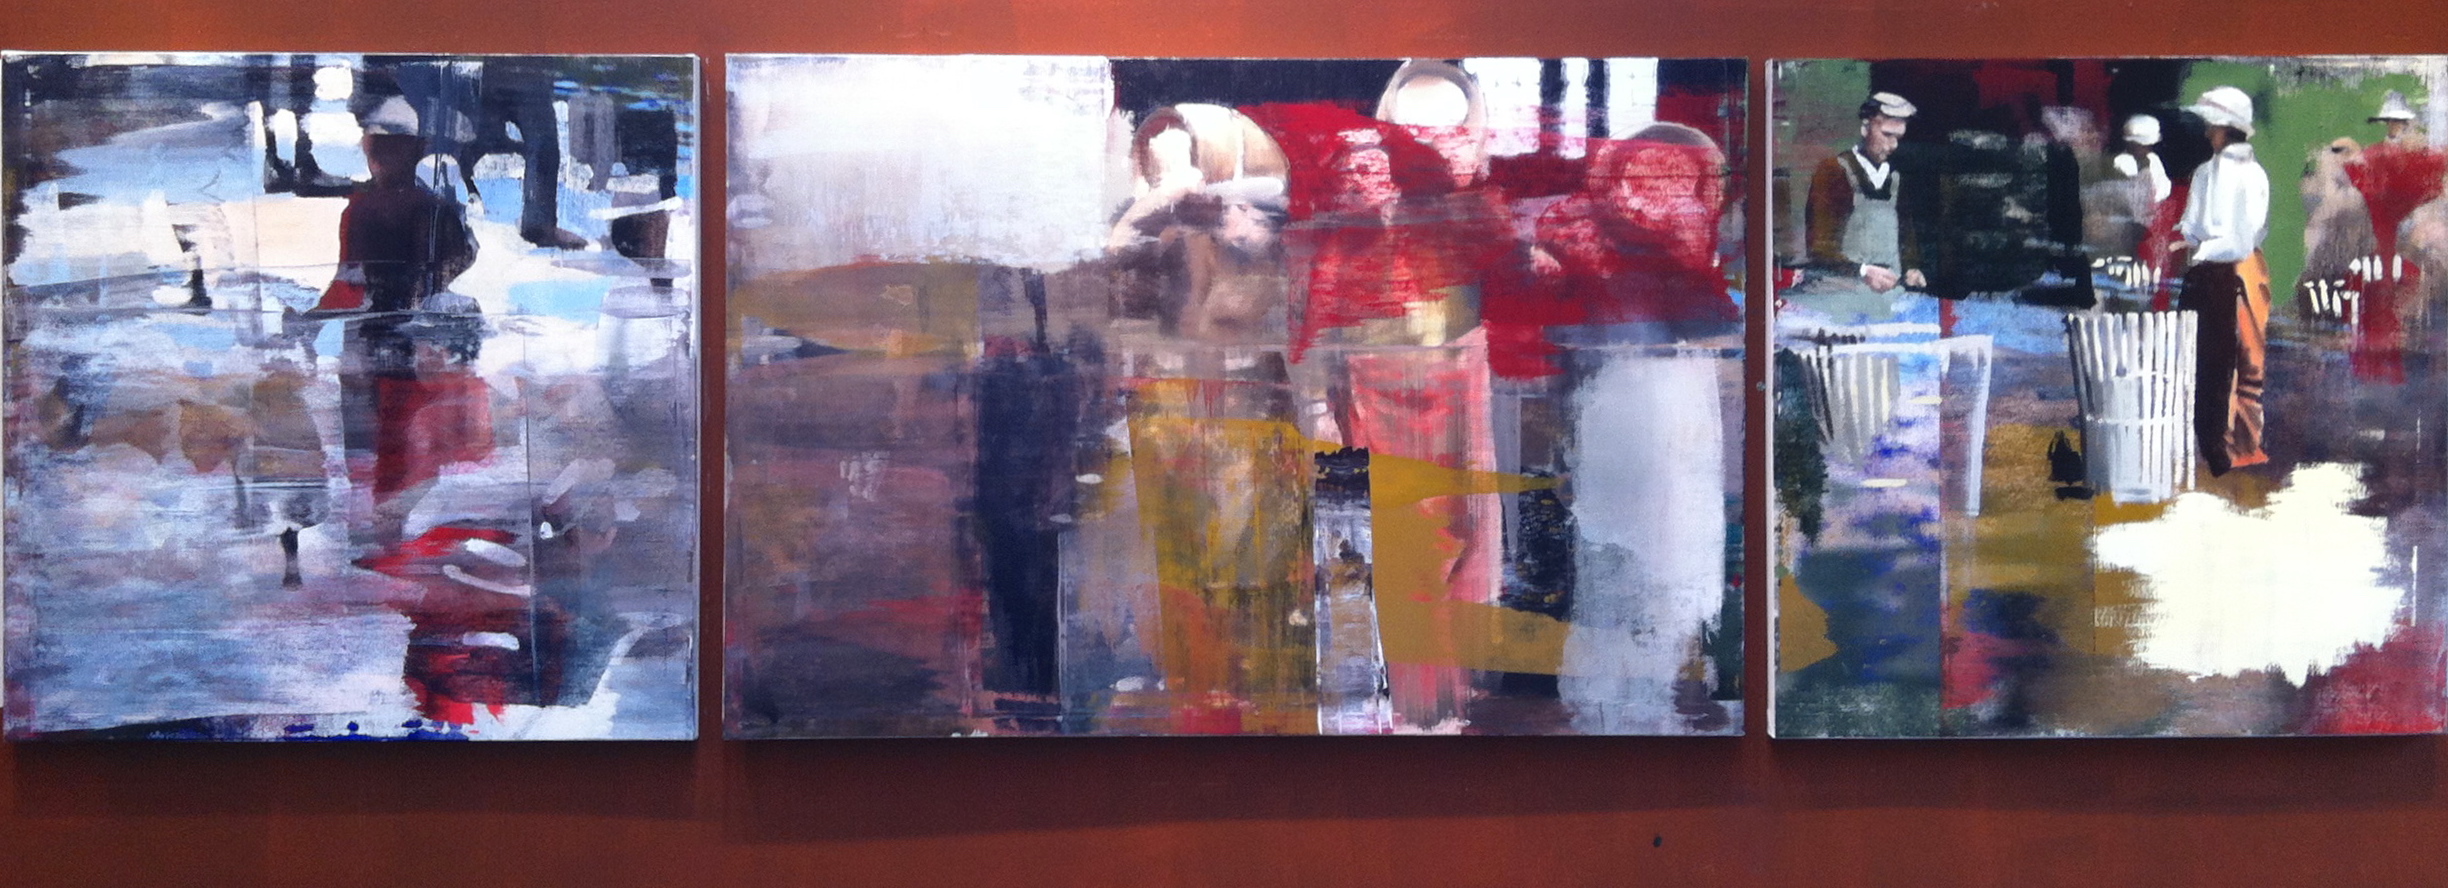 5. Moving the Barrels, Oil on Linen on Panel, 2013, 48” X 168”